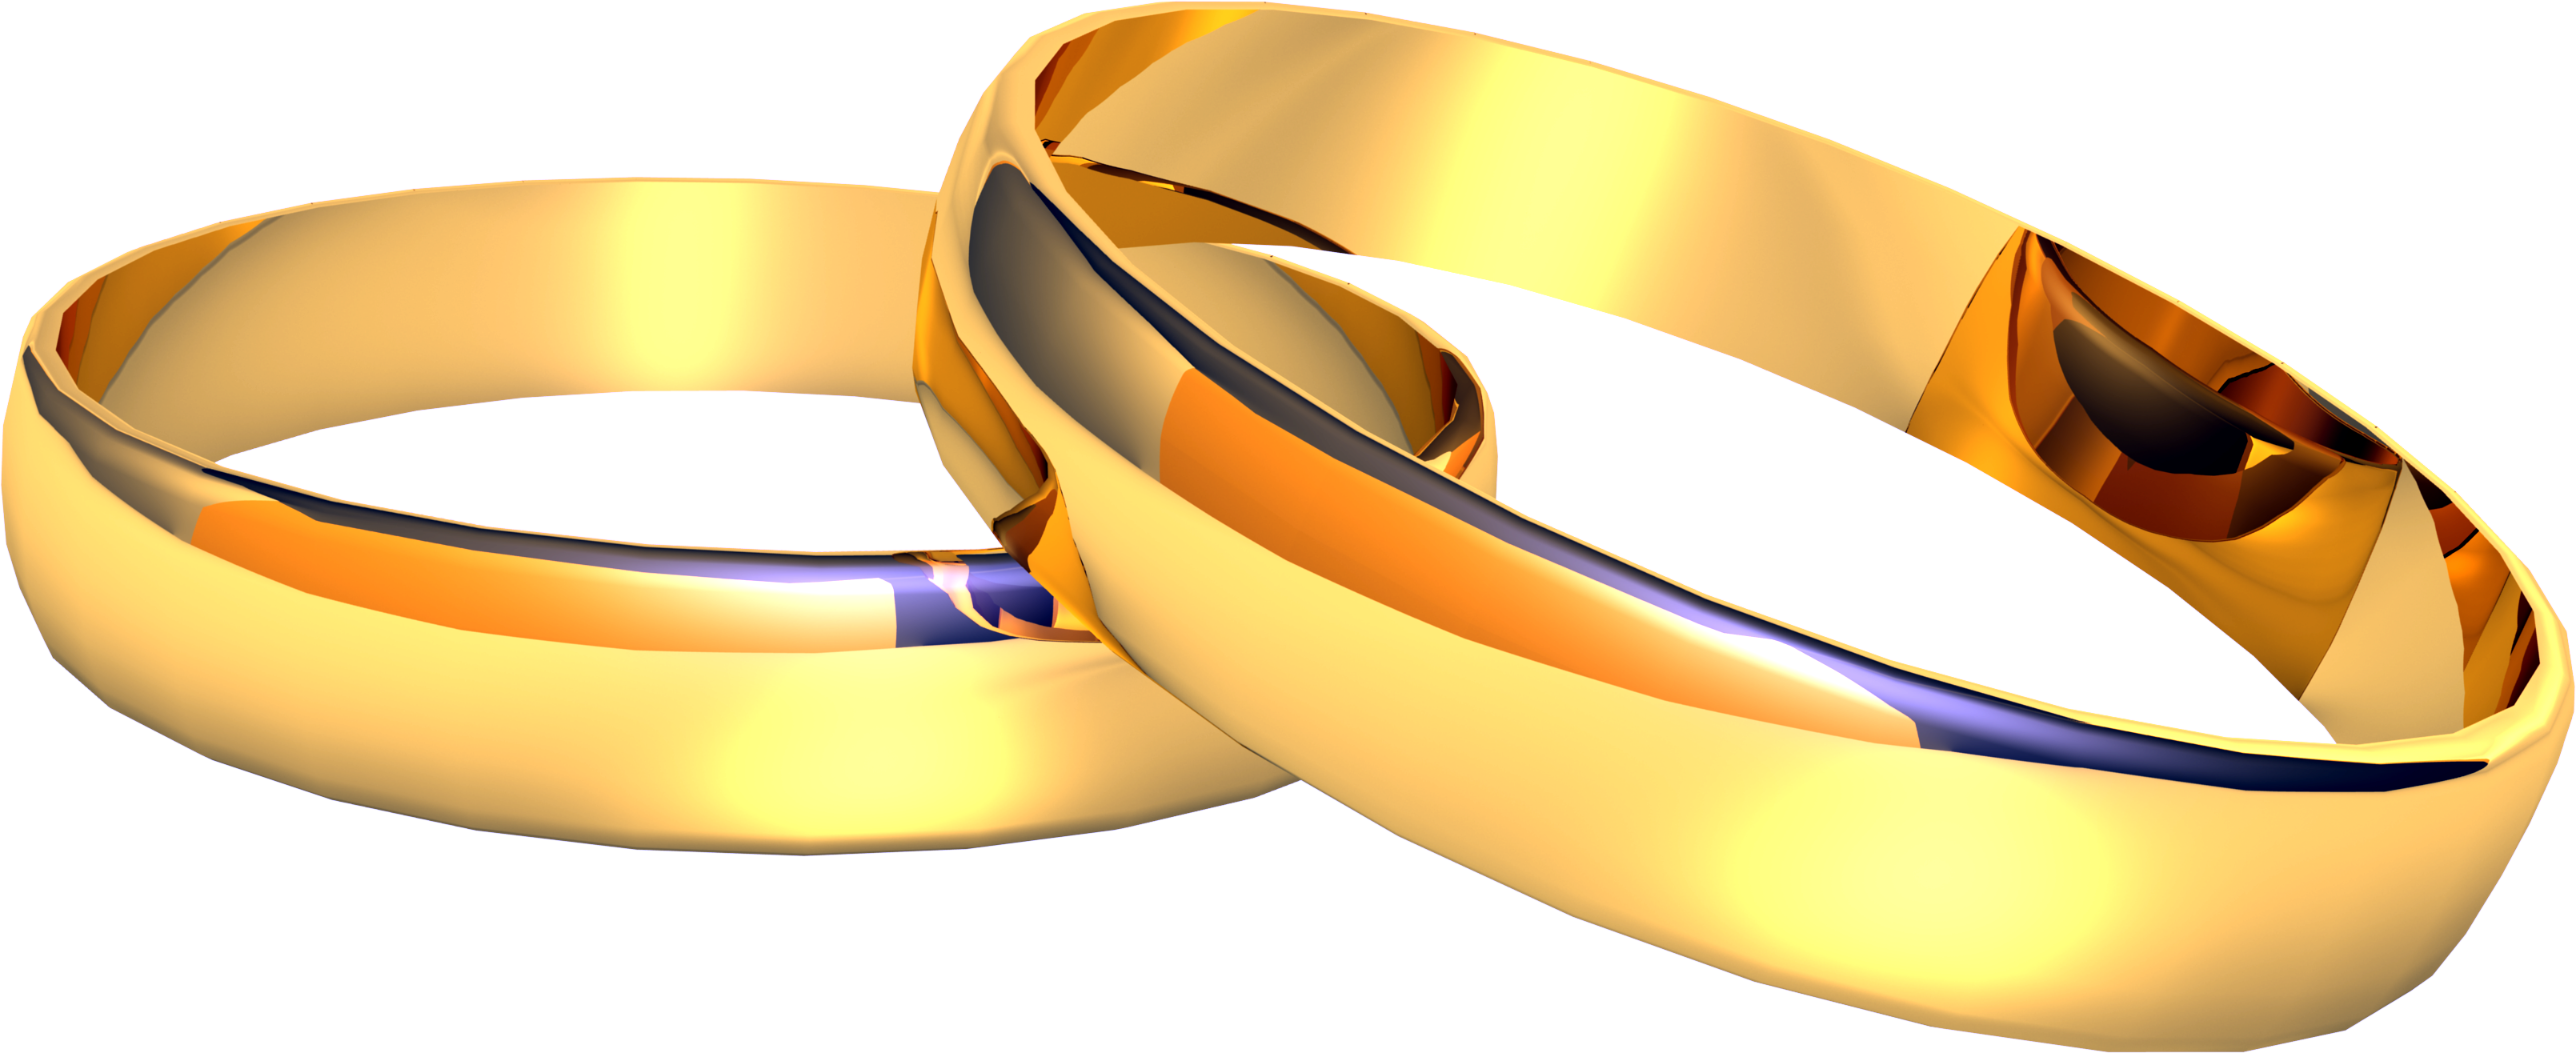 Wedding Png Image Png Image   Wedding Hd Png - Engagement Ring, Transparent background PNG HD thumbnail